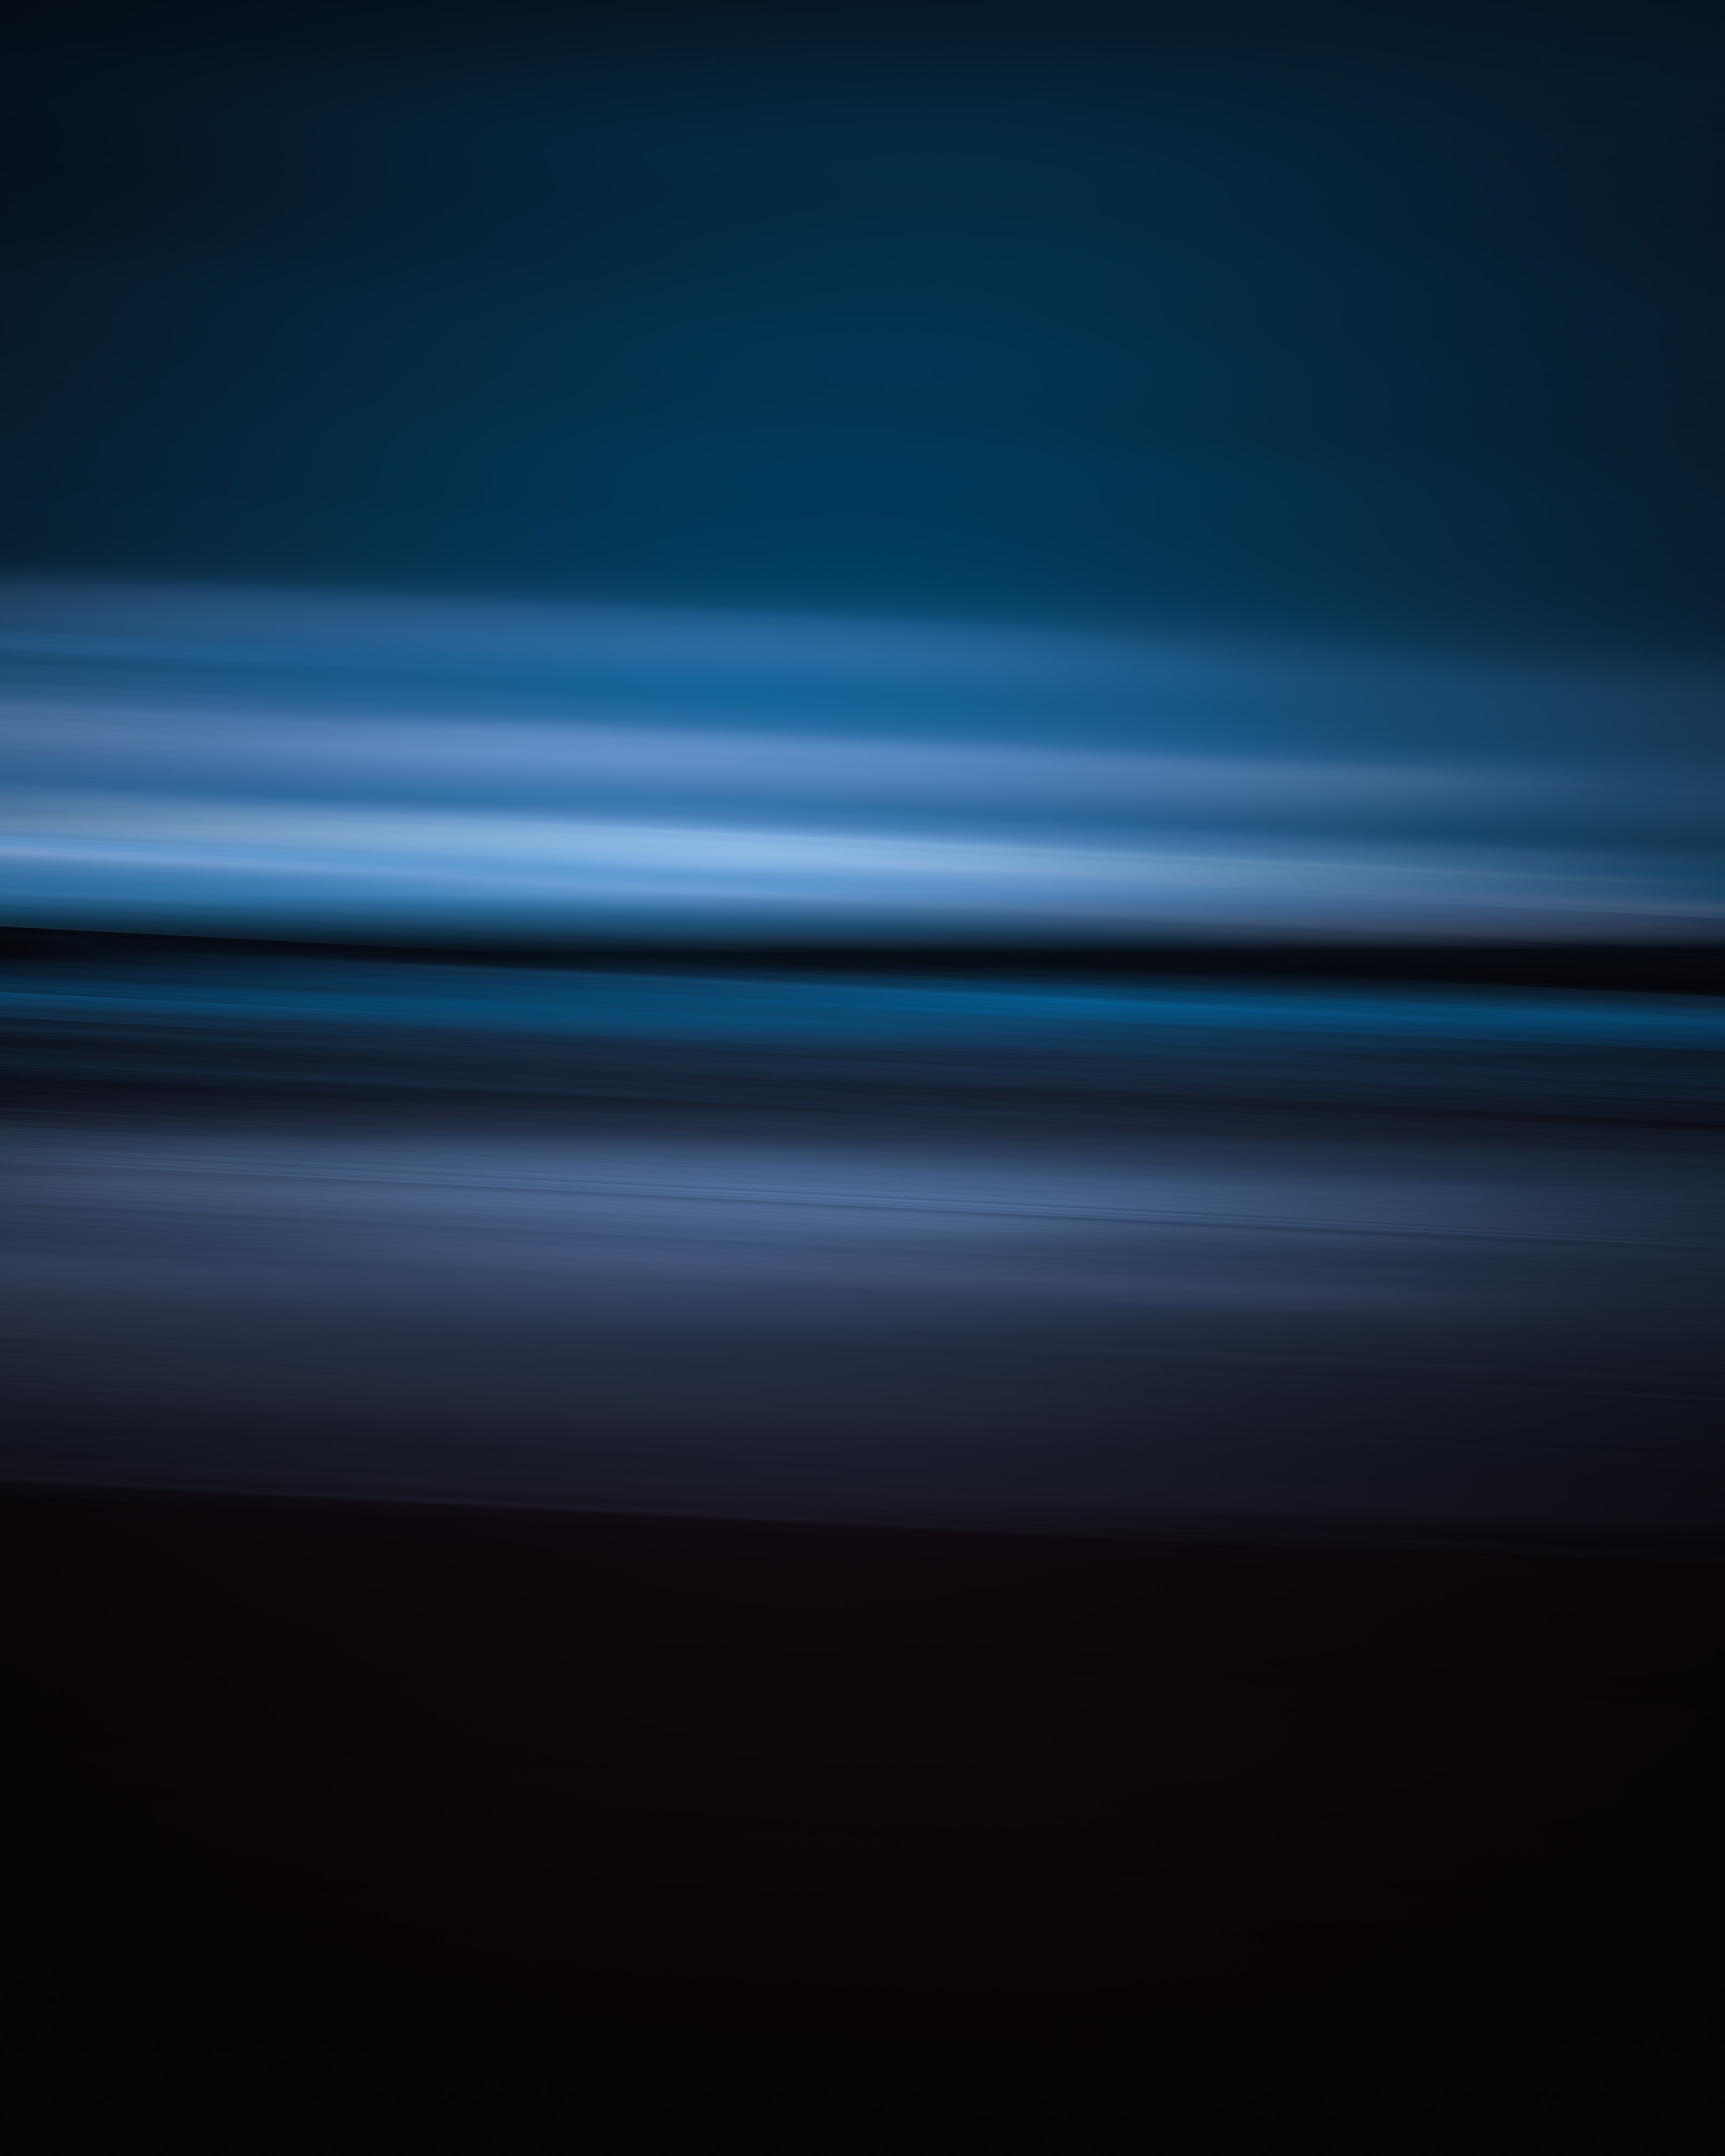 blur, streaks, stripes, blue, abstract, smooth, distortion Aesthetic wallpaper